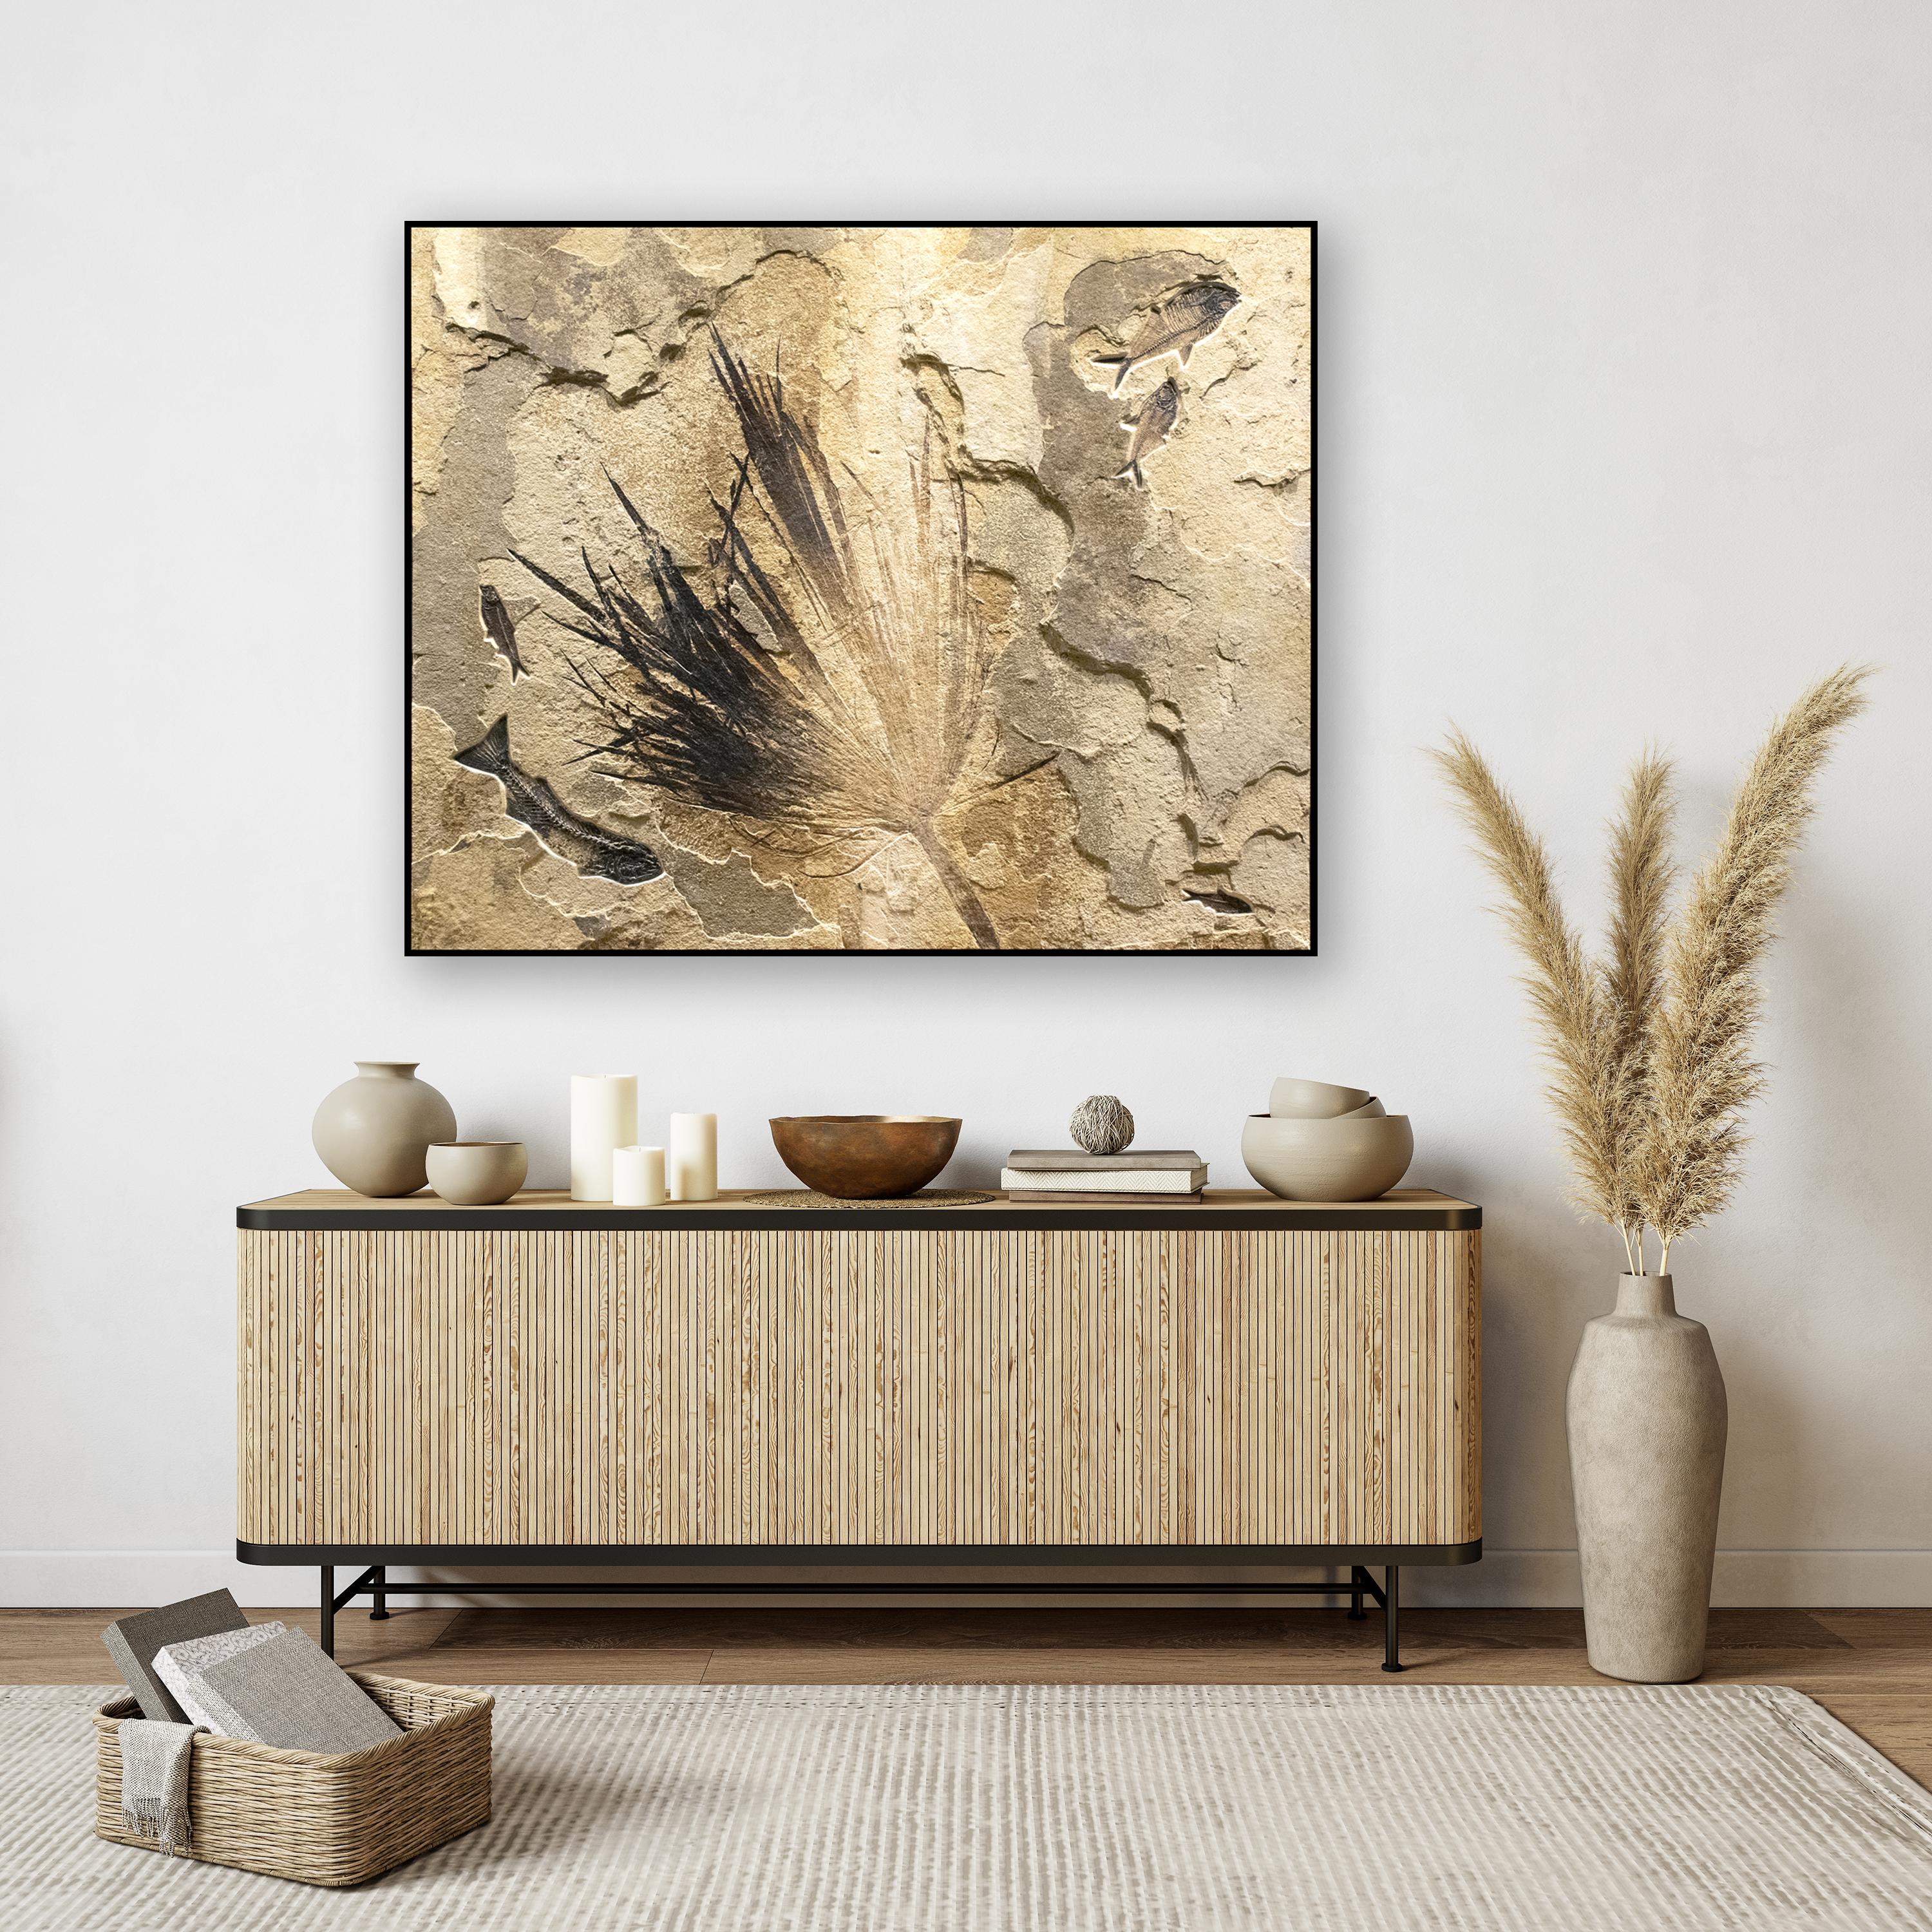 This is an exquisite piece of natural history which works beautifully with design styles ranging from traditional to modern; it features five Eocene era fossils dating back about 50 million years. An exquisite palm frond, a Mioplosus labracoides,